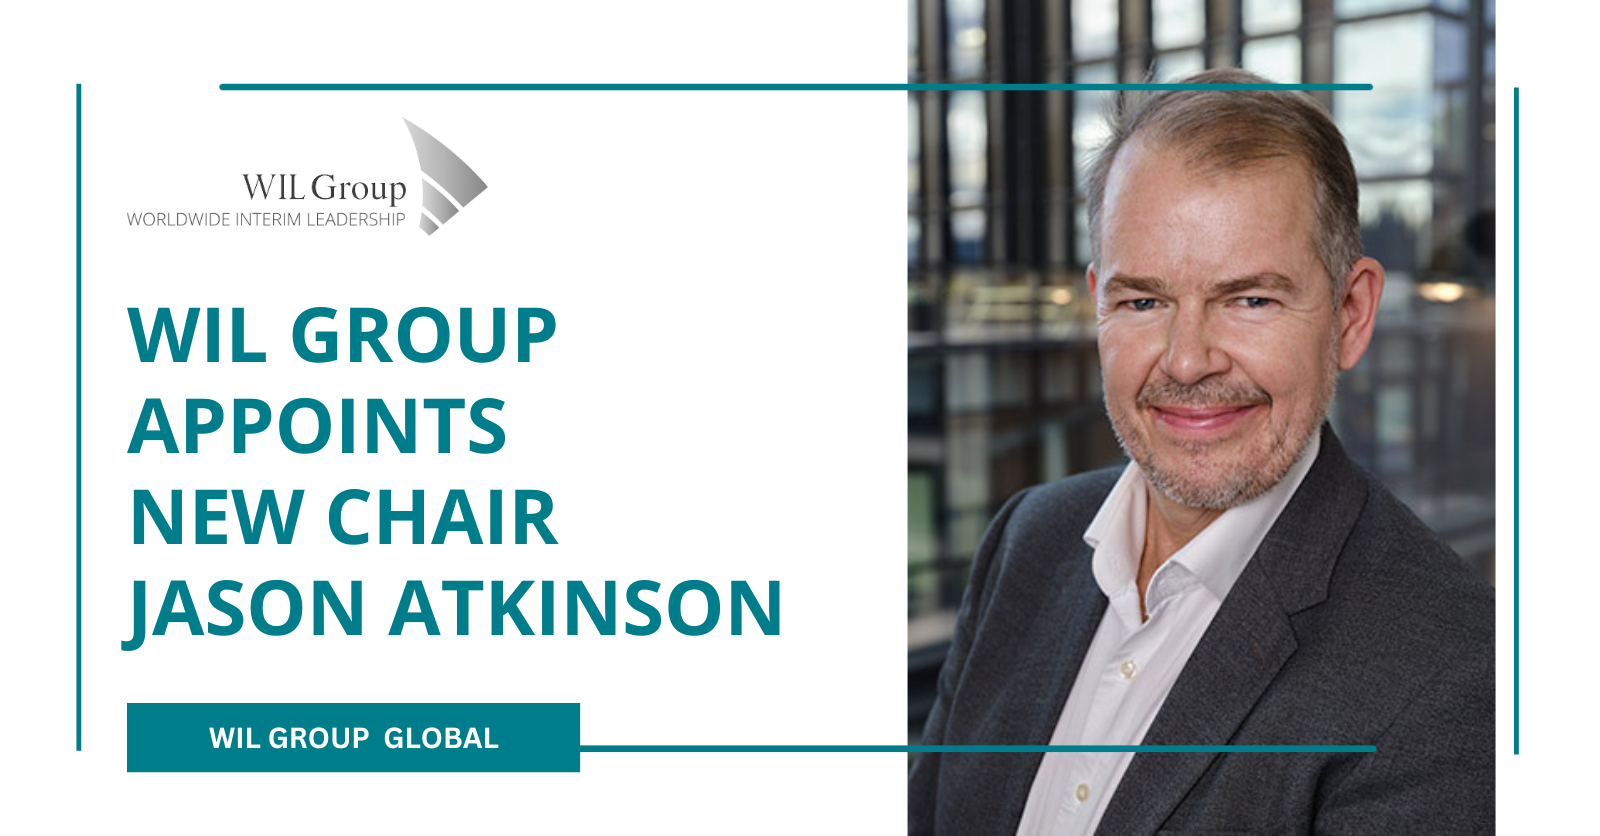 Thumbnail for PRESS RELEASE  - New Chairperson announced for Worldwide Interim Leadership Group.